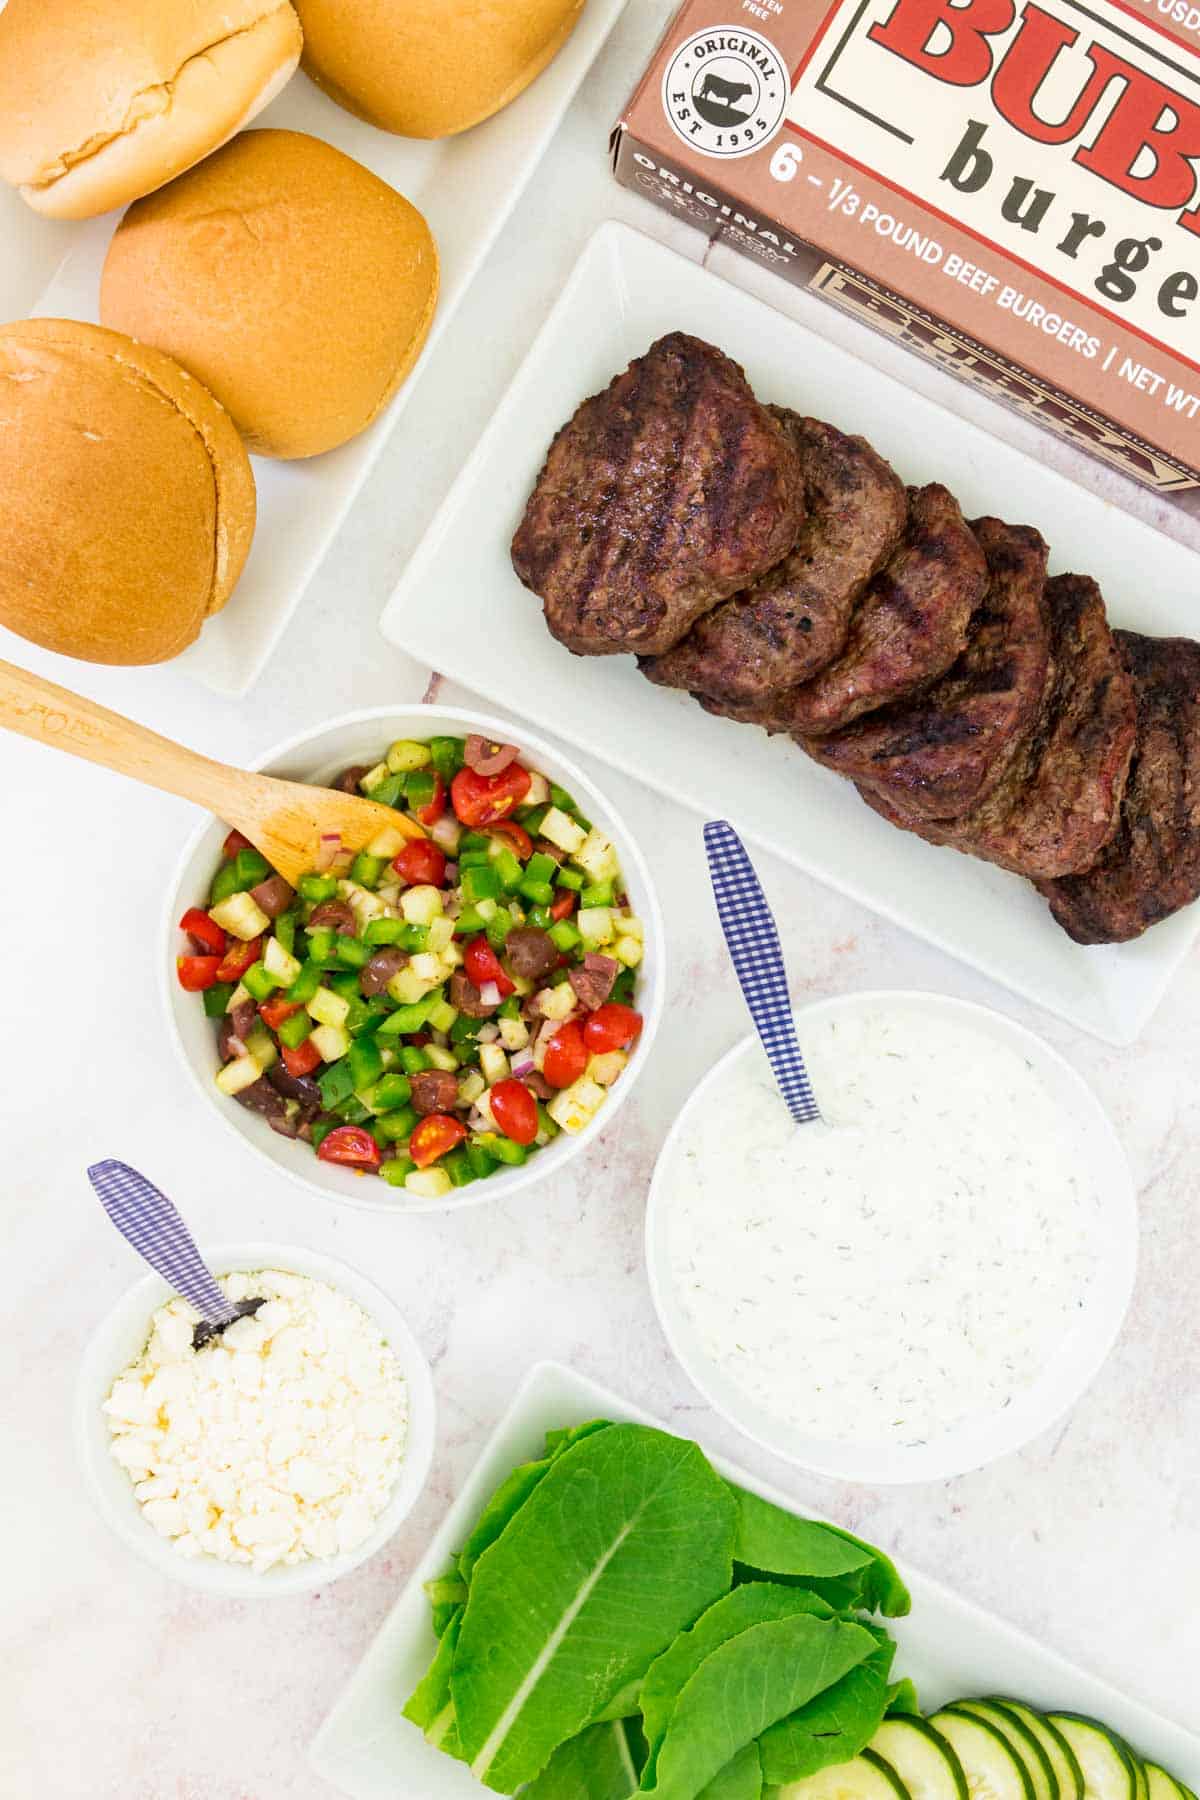 Grilled burgers and buns on platters, a box of BUBBA burgers, and bowls of Greek burger toppings.